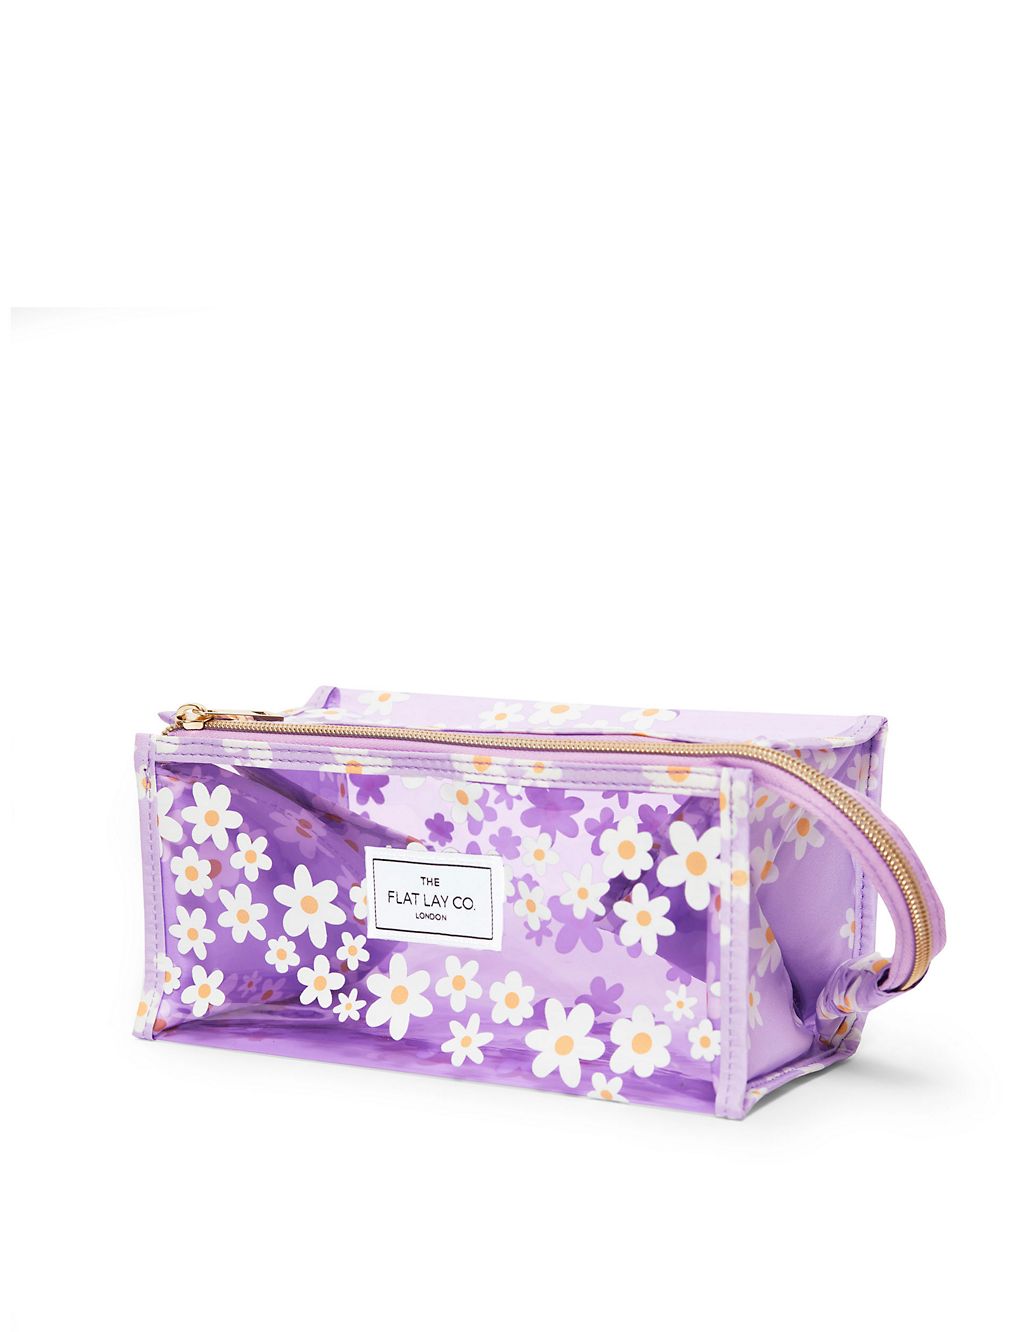 The Flat Lay Co. Makeup Jelly Box Bag in Lilac Daisy 1 of 6